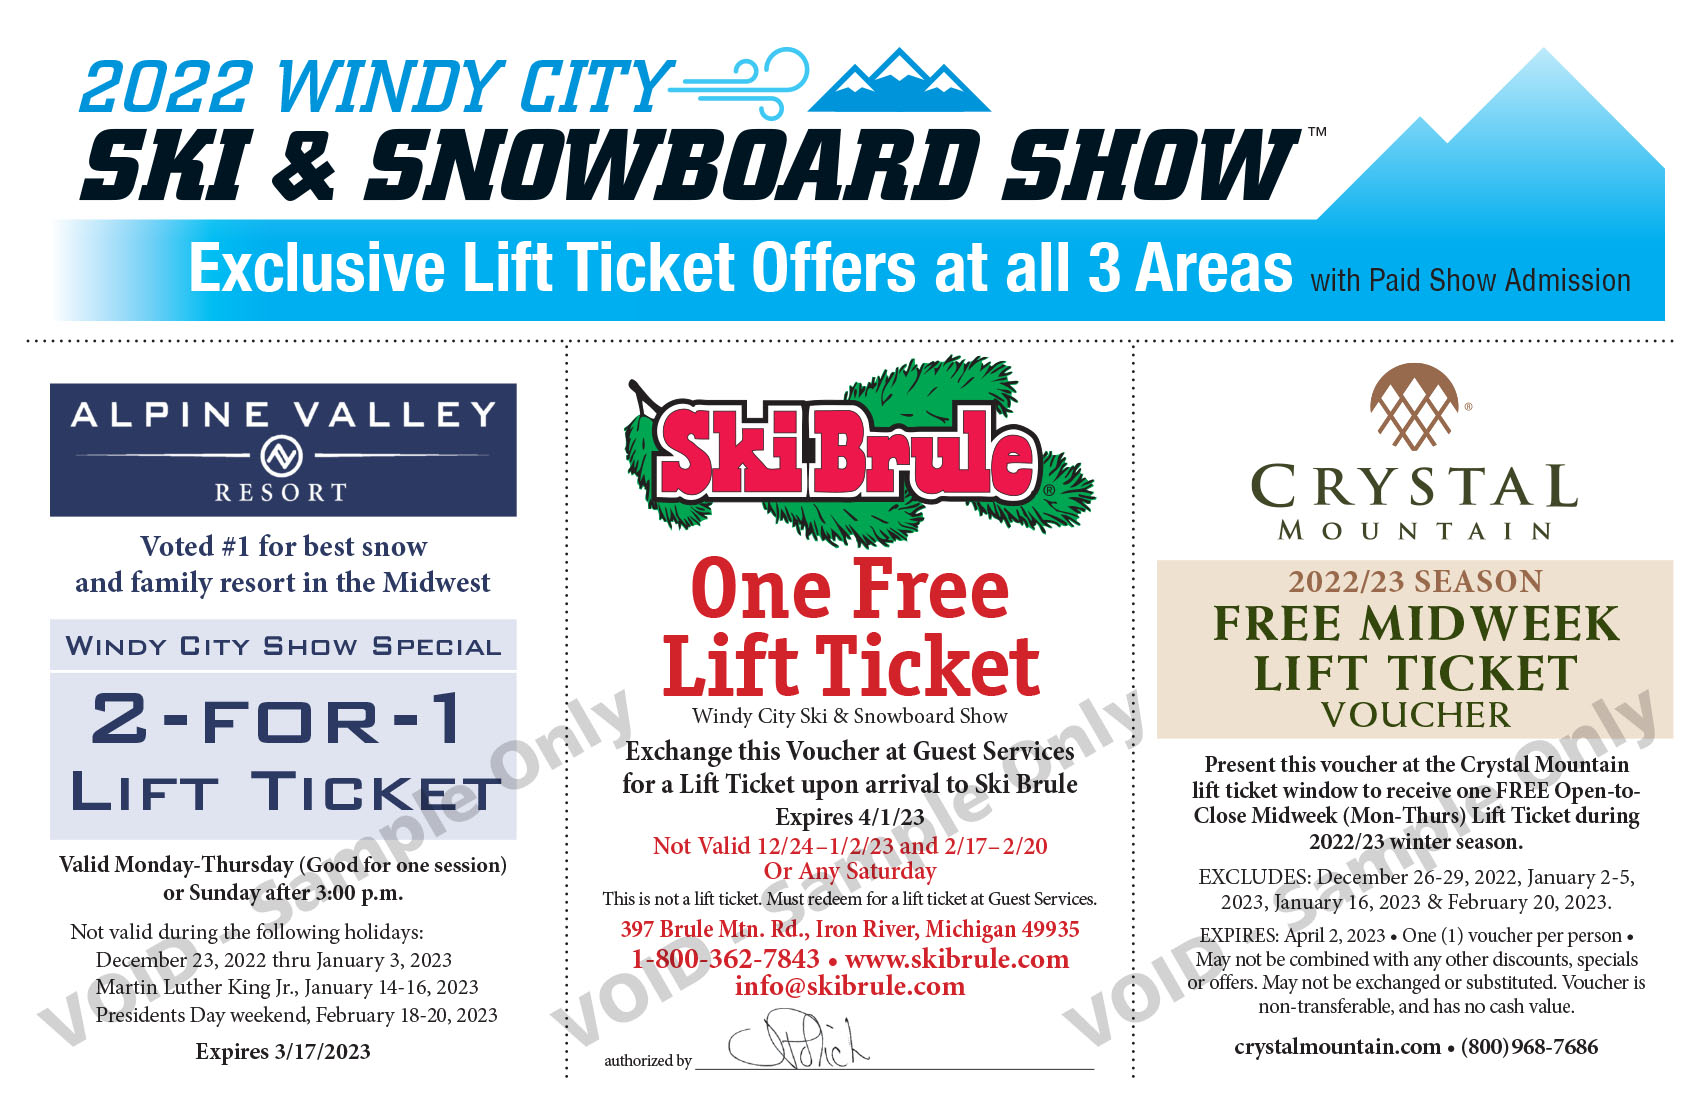 Lift ticket coupon offers for Windy City Ski snowboard show 2022